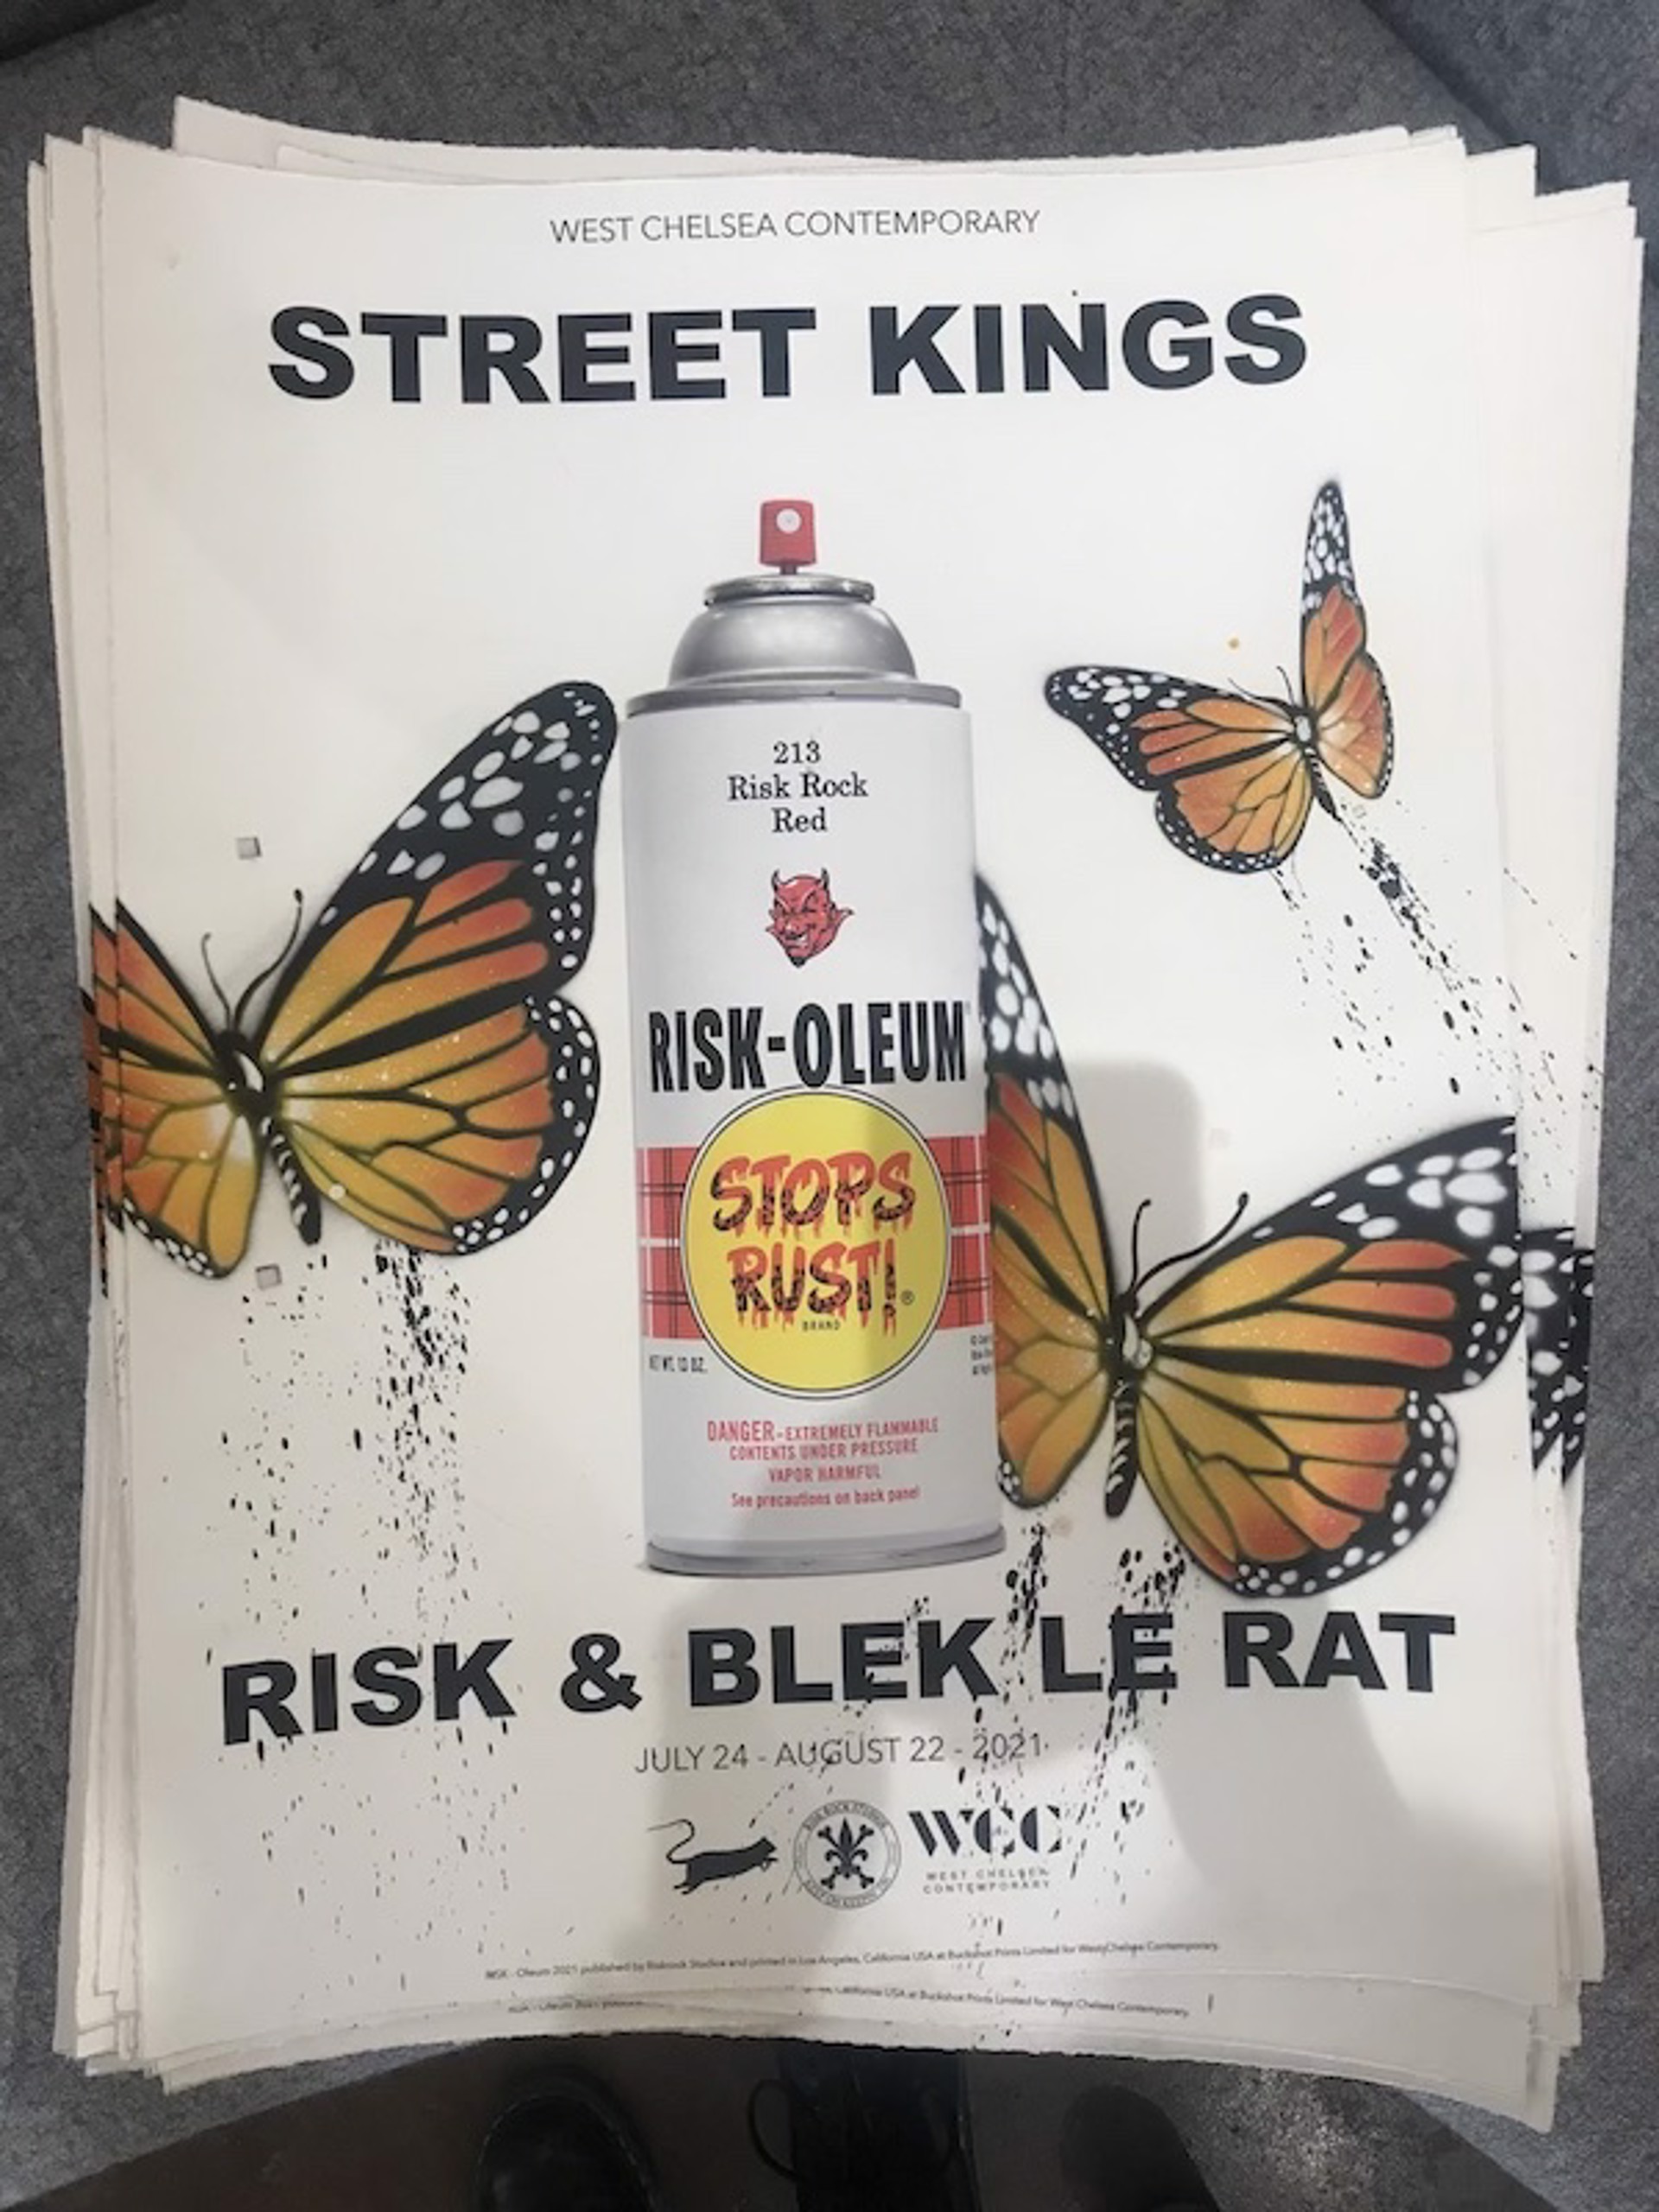 Street Kings Show Print (34/50) by Risk